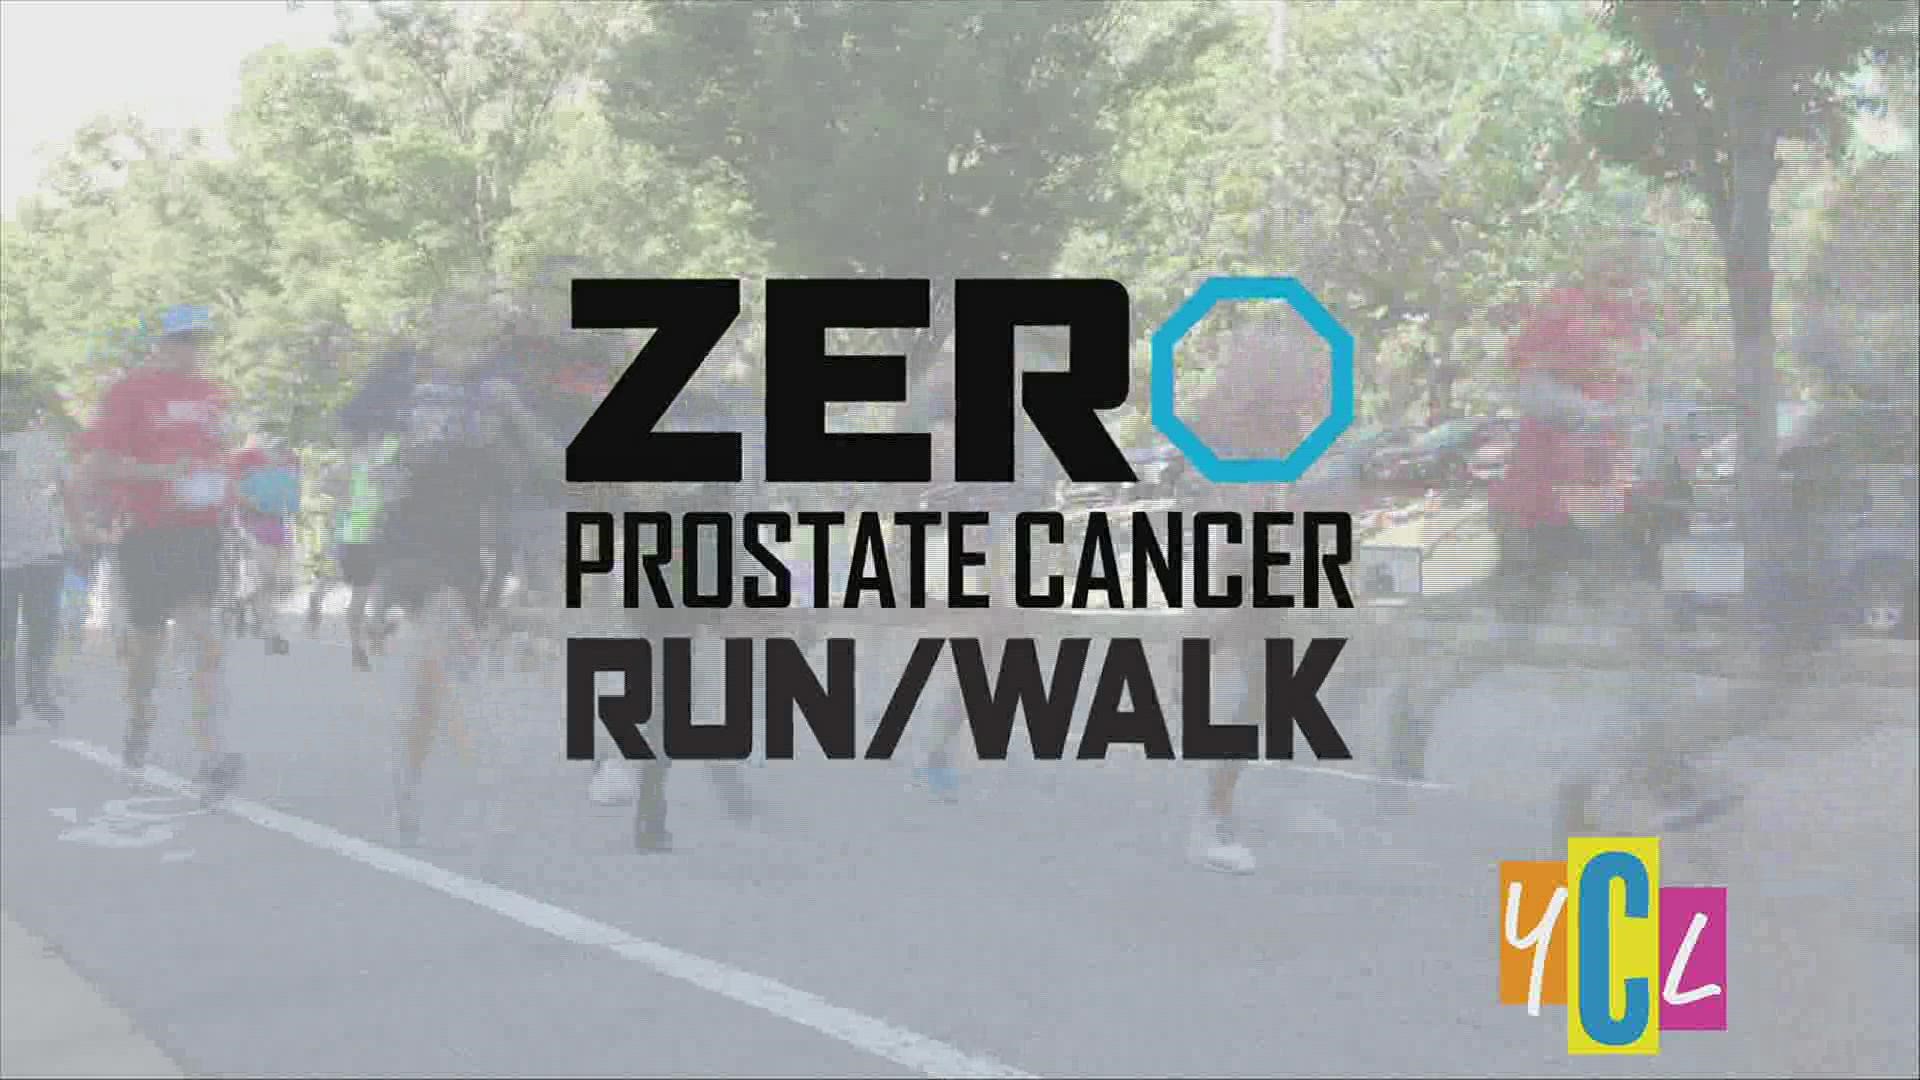 Join those committed to eliminating the pain and suffering of prostate cancer at this year's Zero Prostate Cancer Run/Walk!